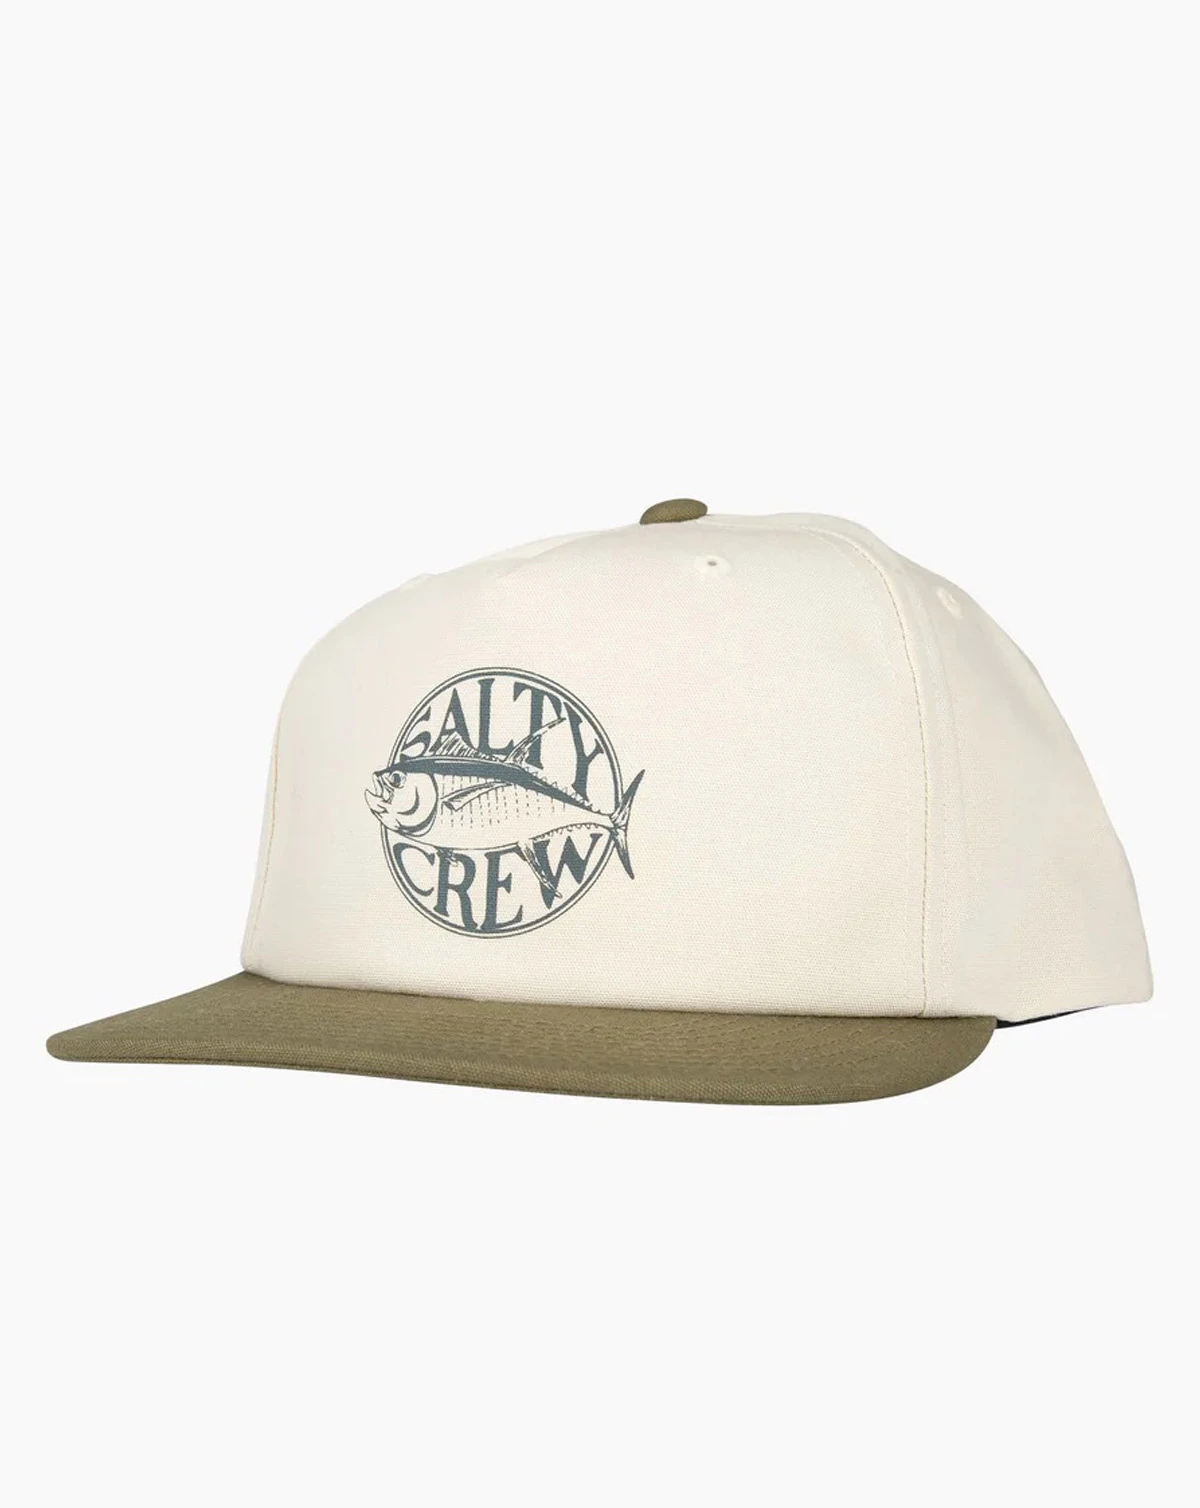 military Buy Army online | Army Army caps – & Star caps